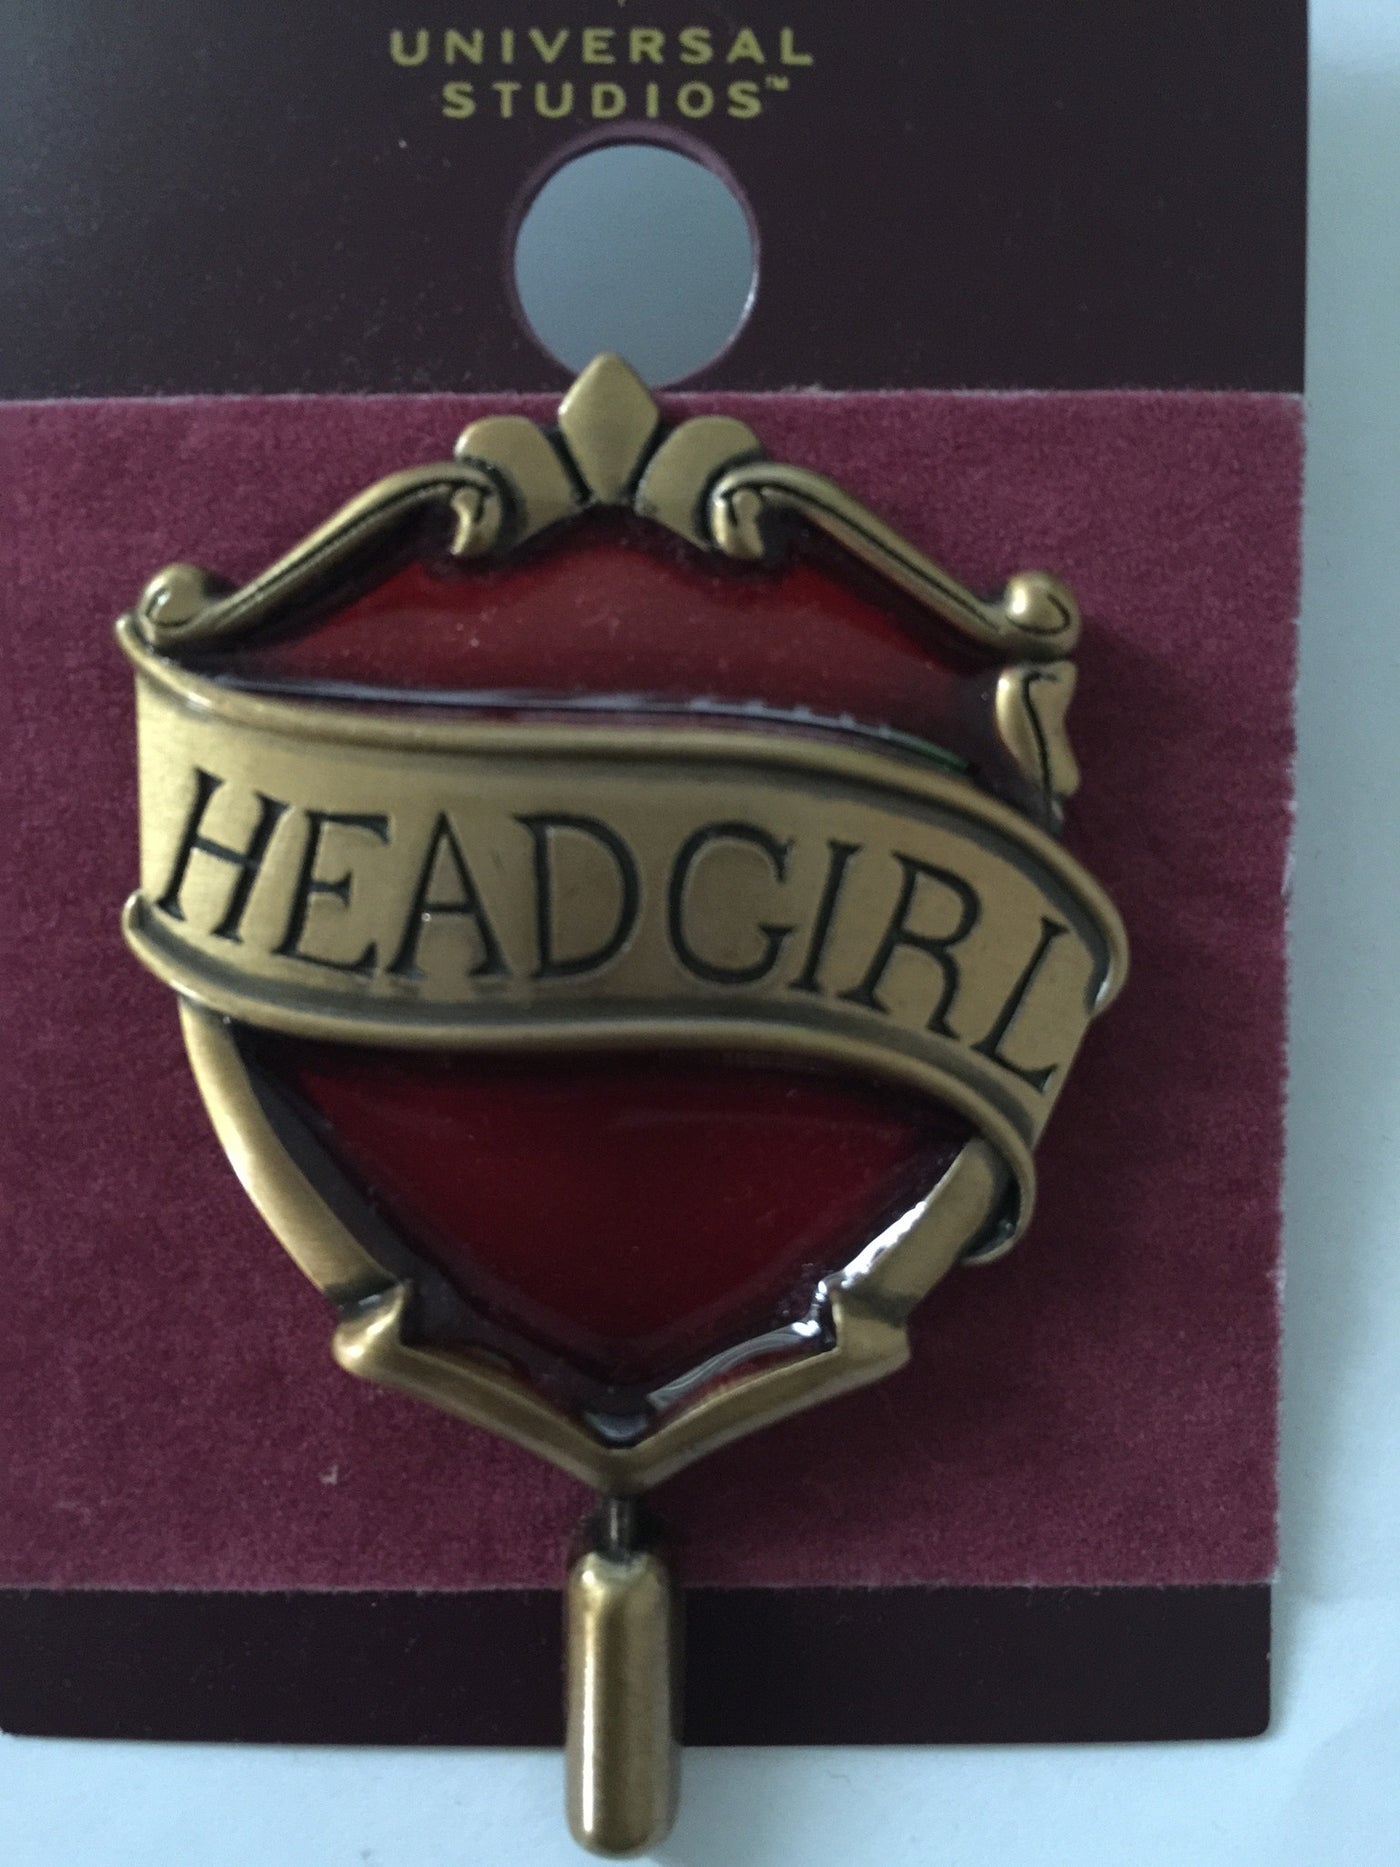 Universal Studios Harry Potter Gryffindor Head Girl Pin New with Card